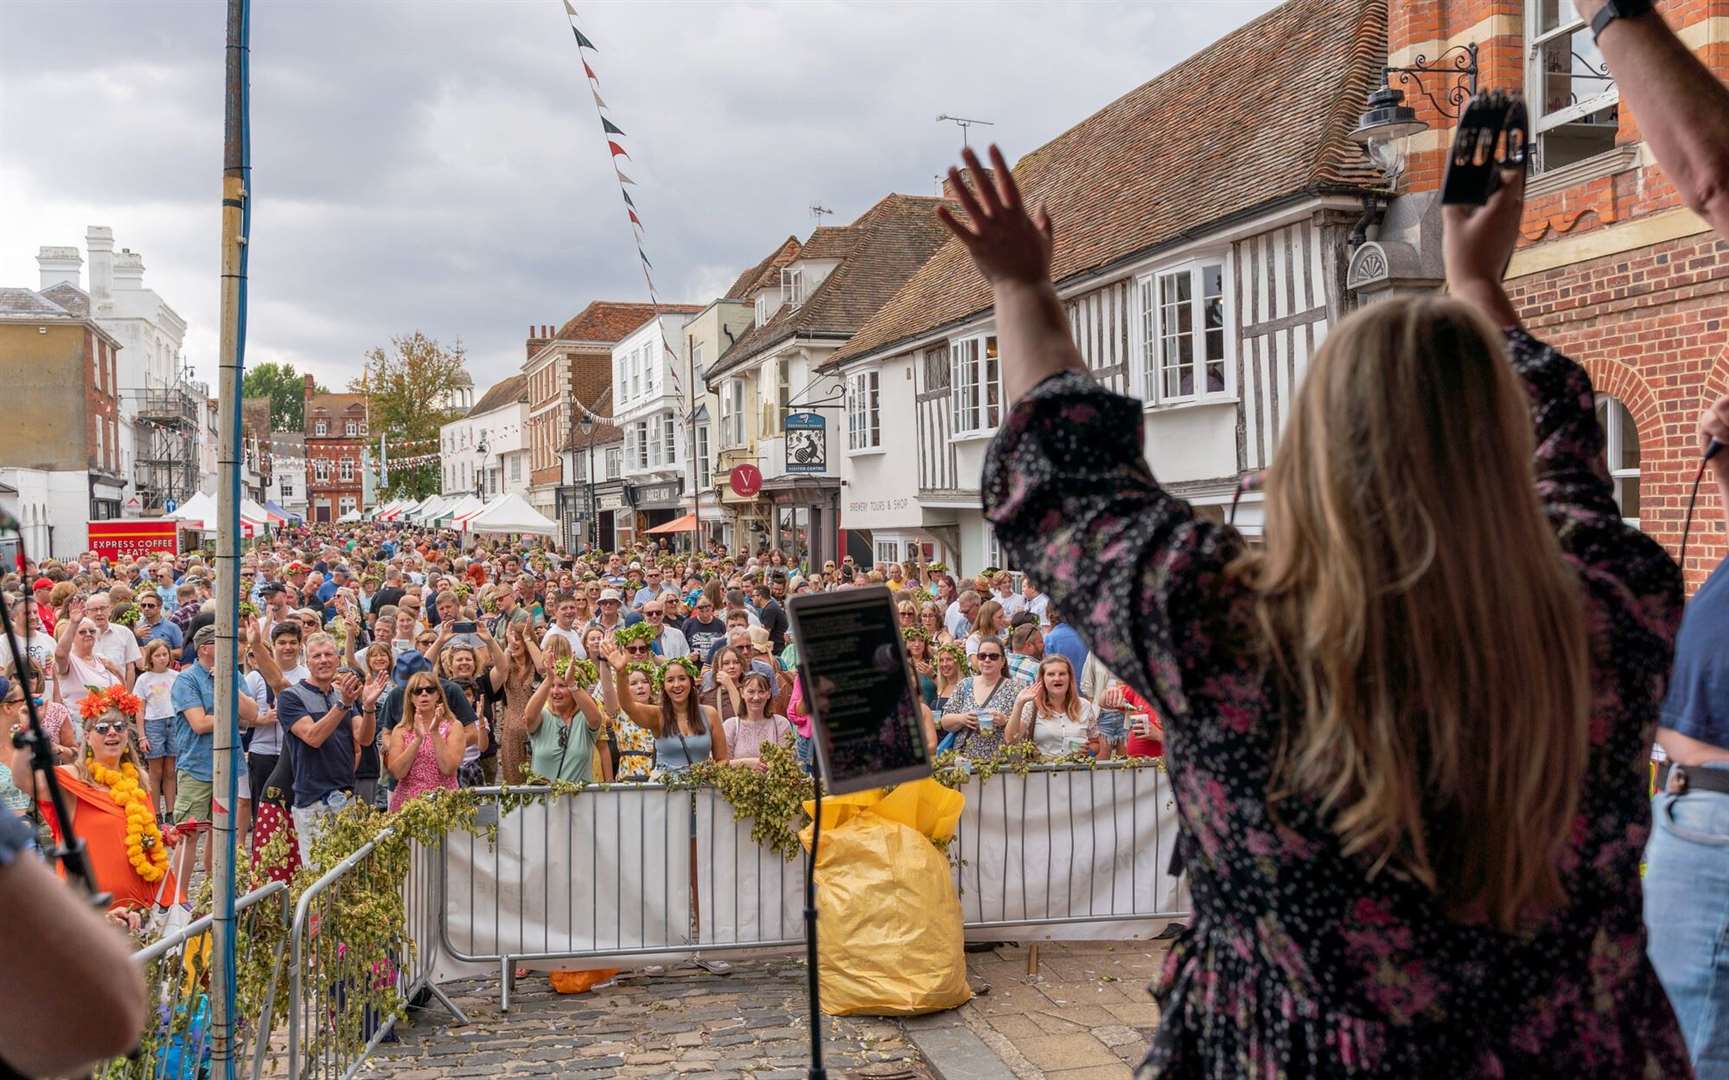 There will be bands performing on outdoor stages and inside the town’s pubs all weekend. Picture: Shepherd Neame